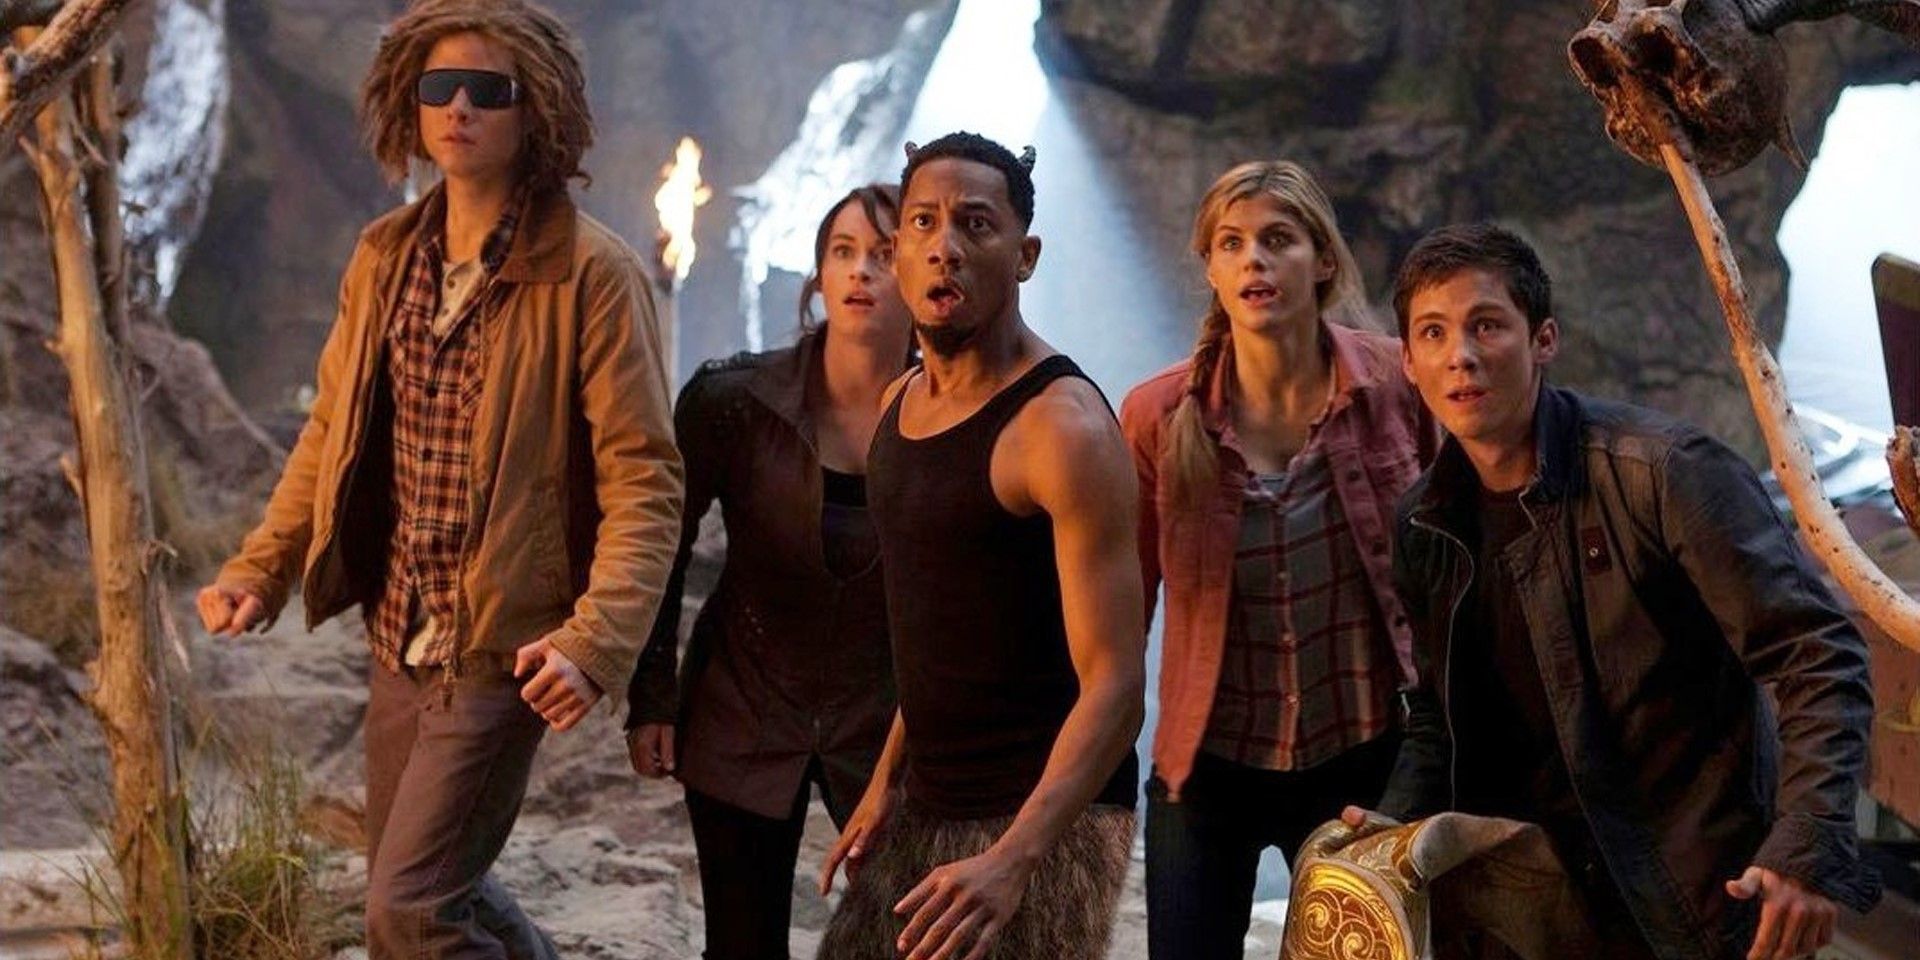 Tyson, Clarisse, Grover, Annabeth, and Percy preparing for a fight in Percy Jackson and the Sea of Monsters